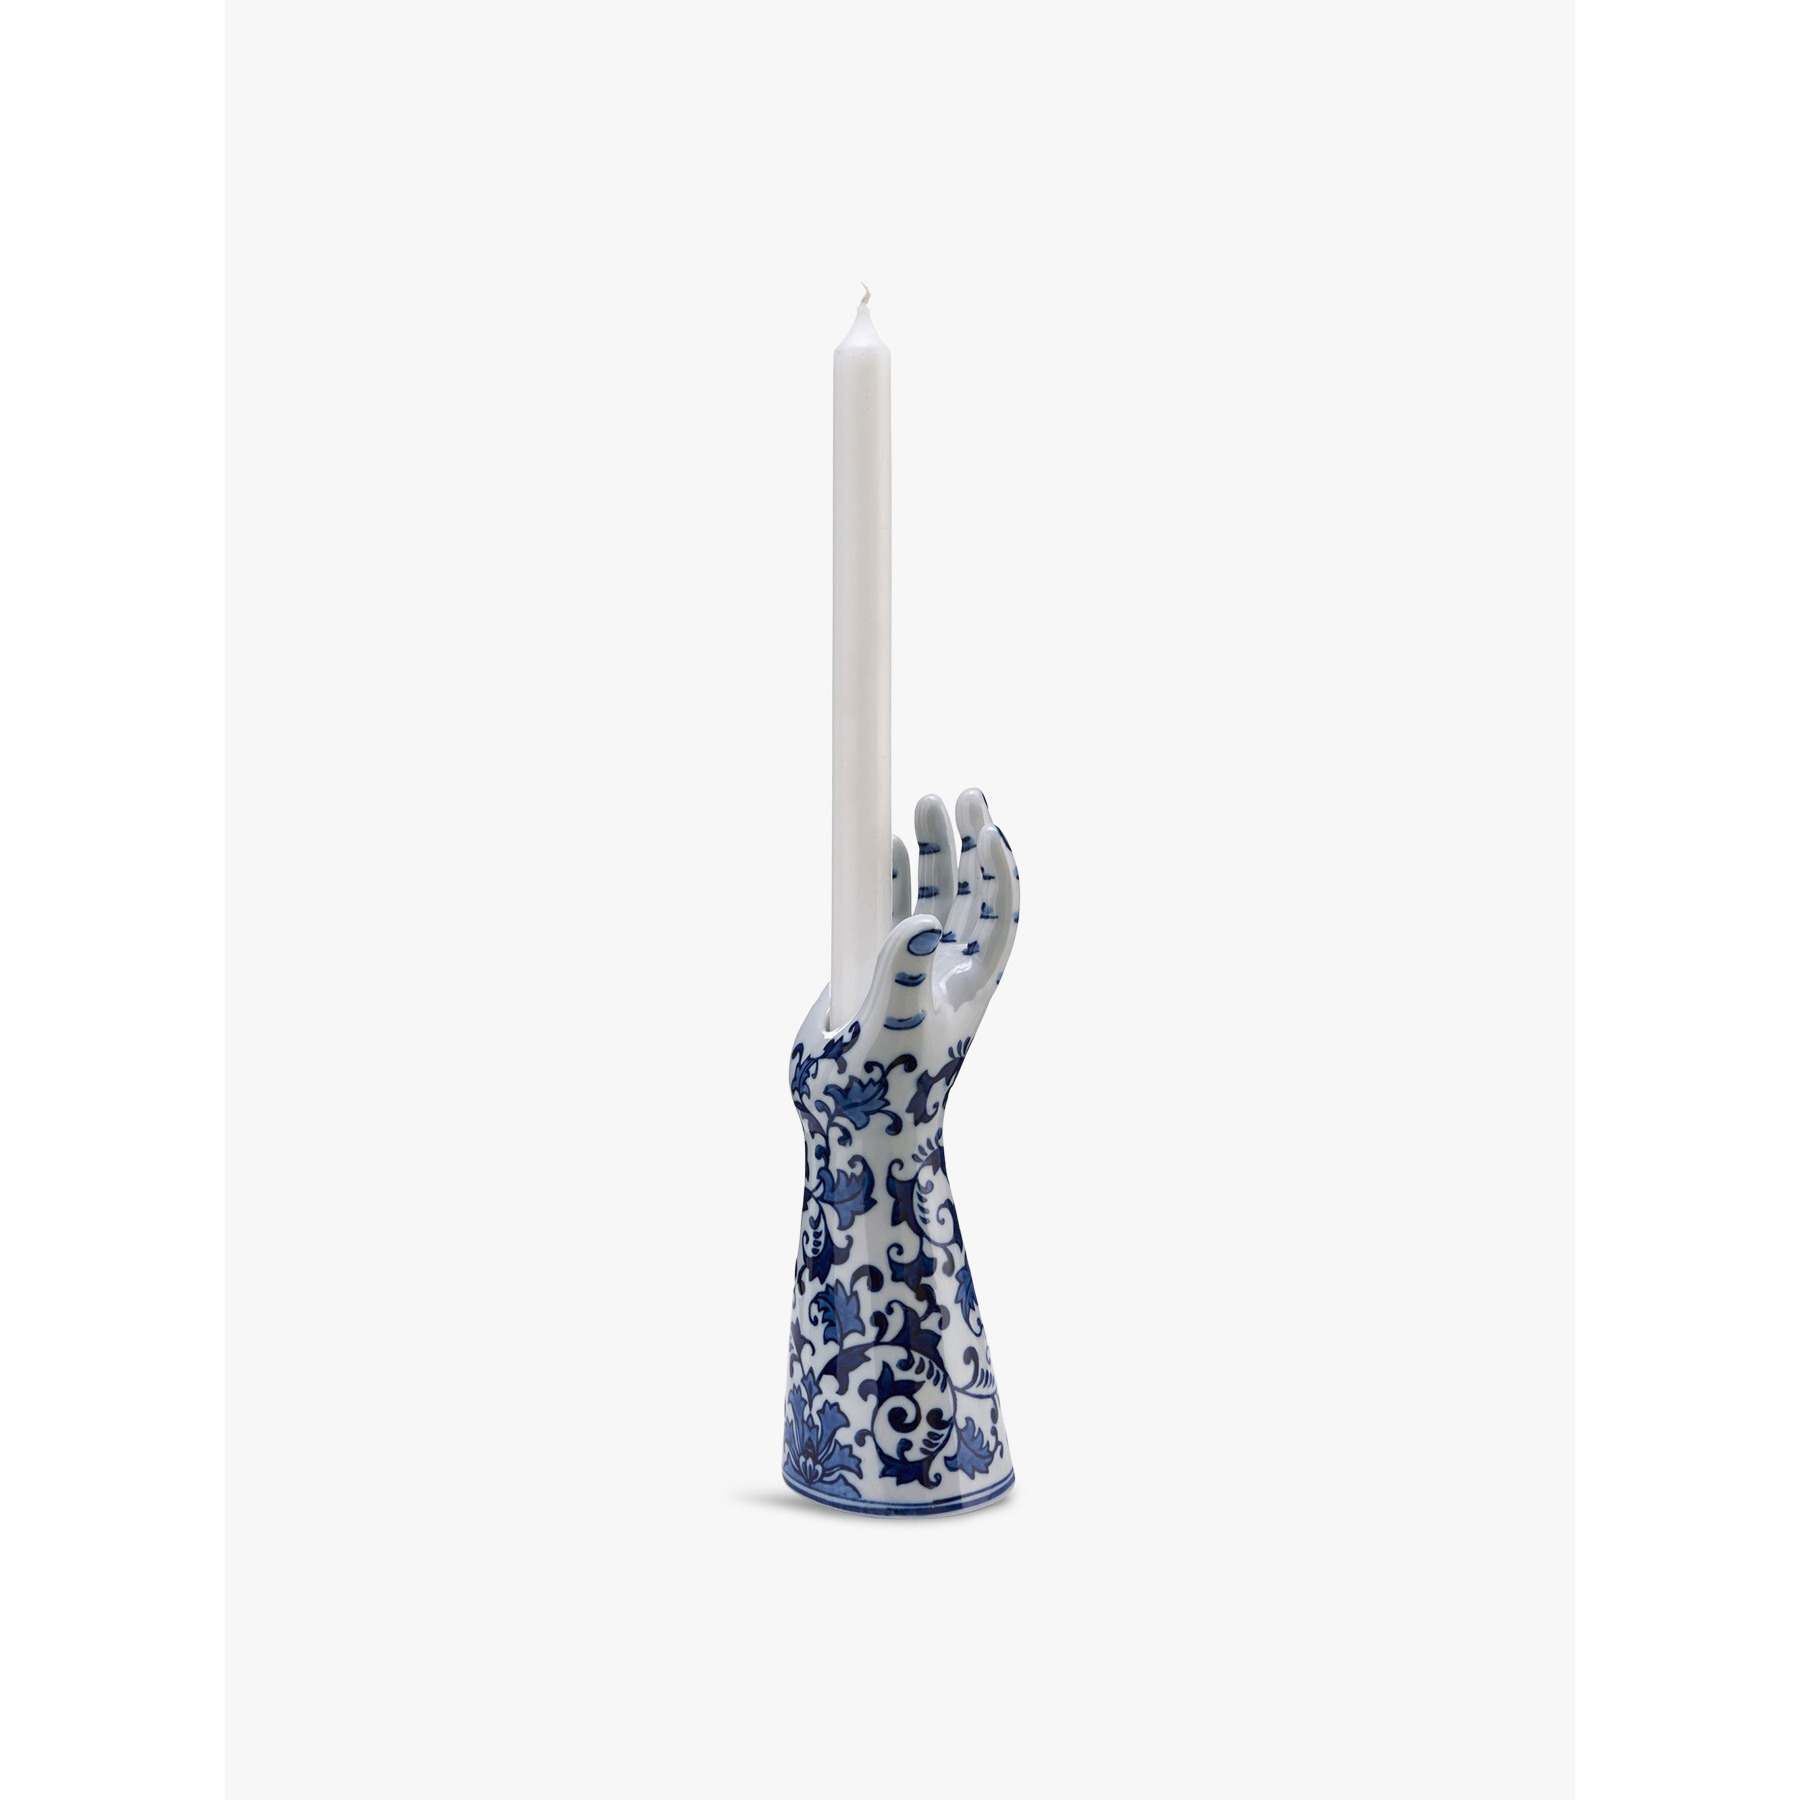 POLSPOTTEN Candle Holder Handsup Small - image 1